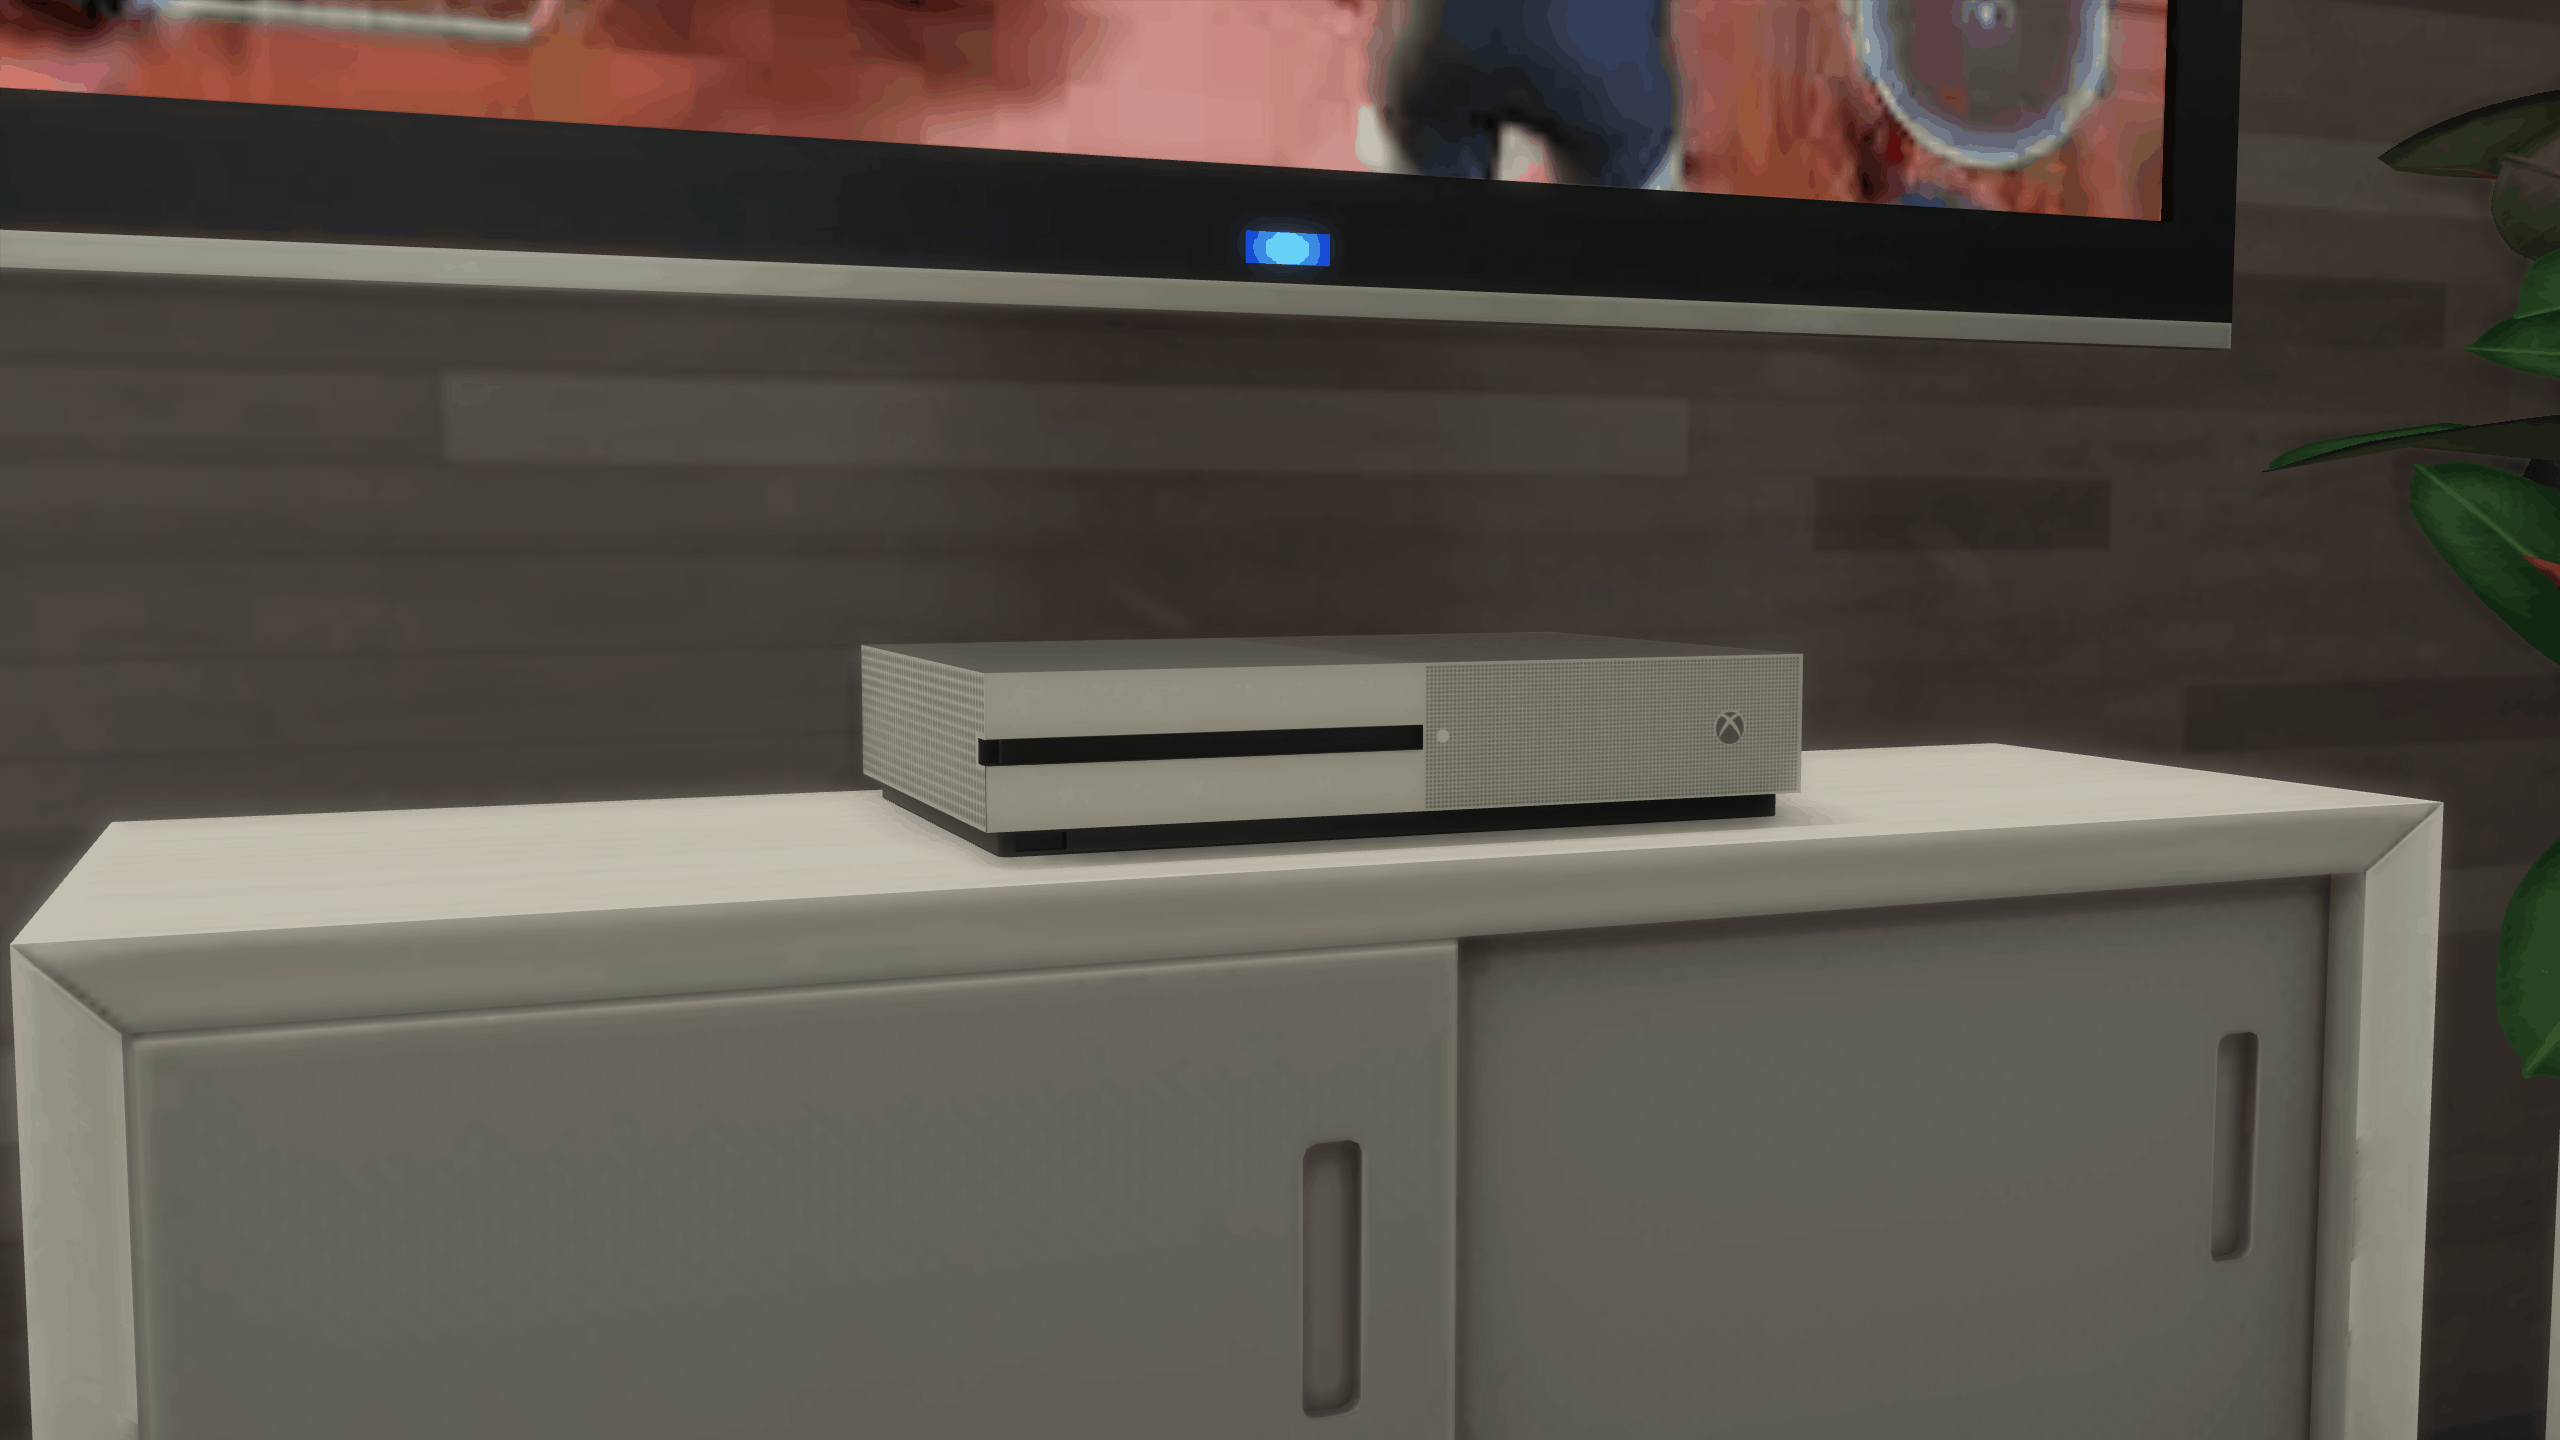 the sims 4 ps4 game console mod